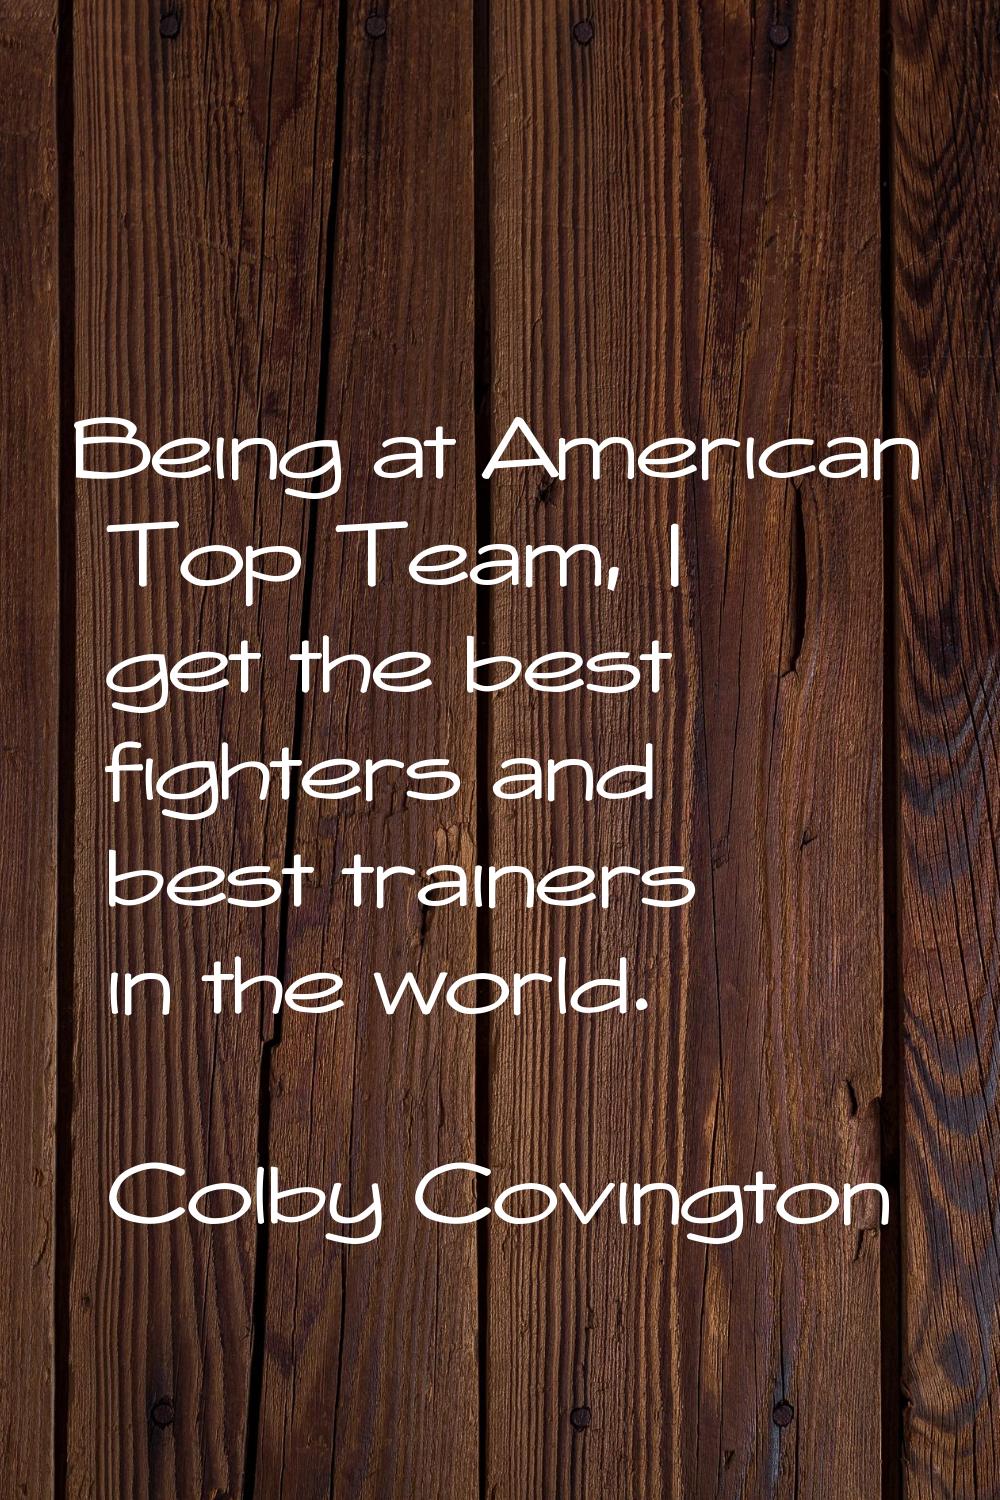 Being at American Top Team, I get the best fighters and best trainers in the world.